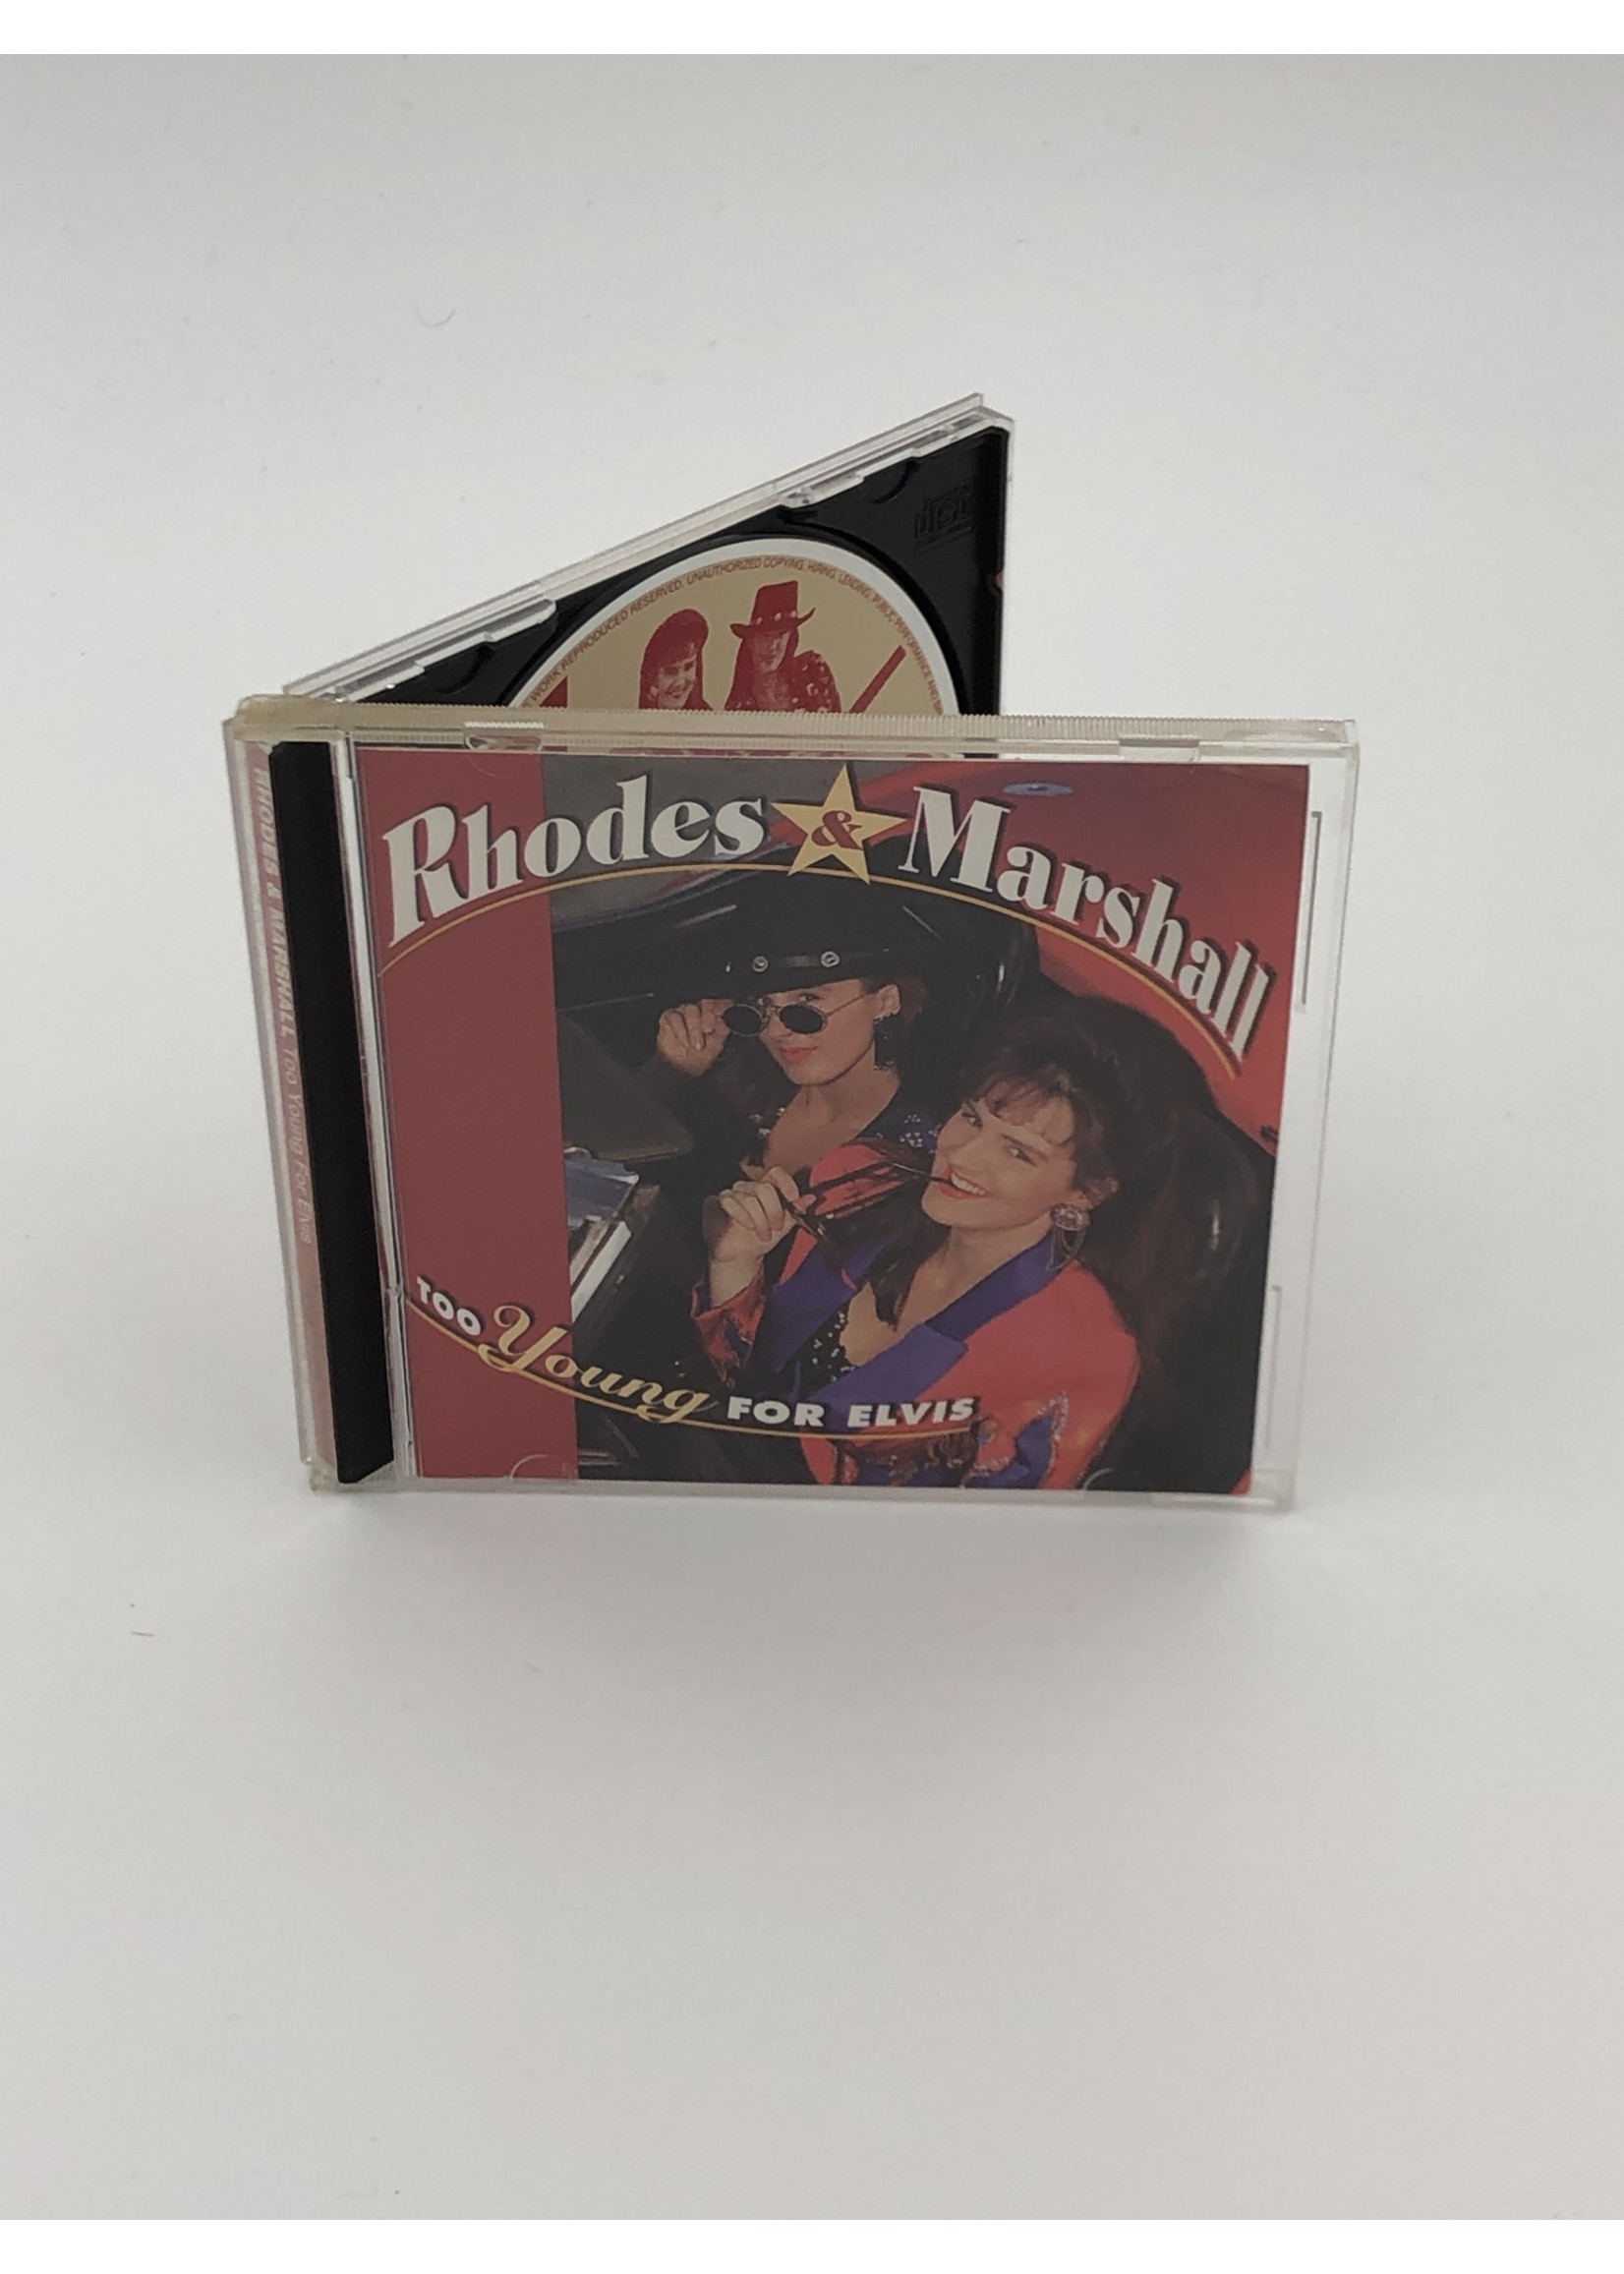 CD Rhodes & Marshall: Too Young for Elvis CD